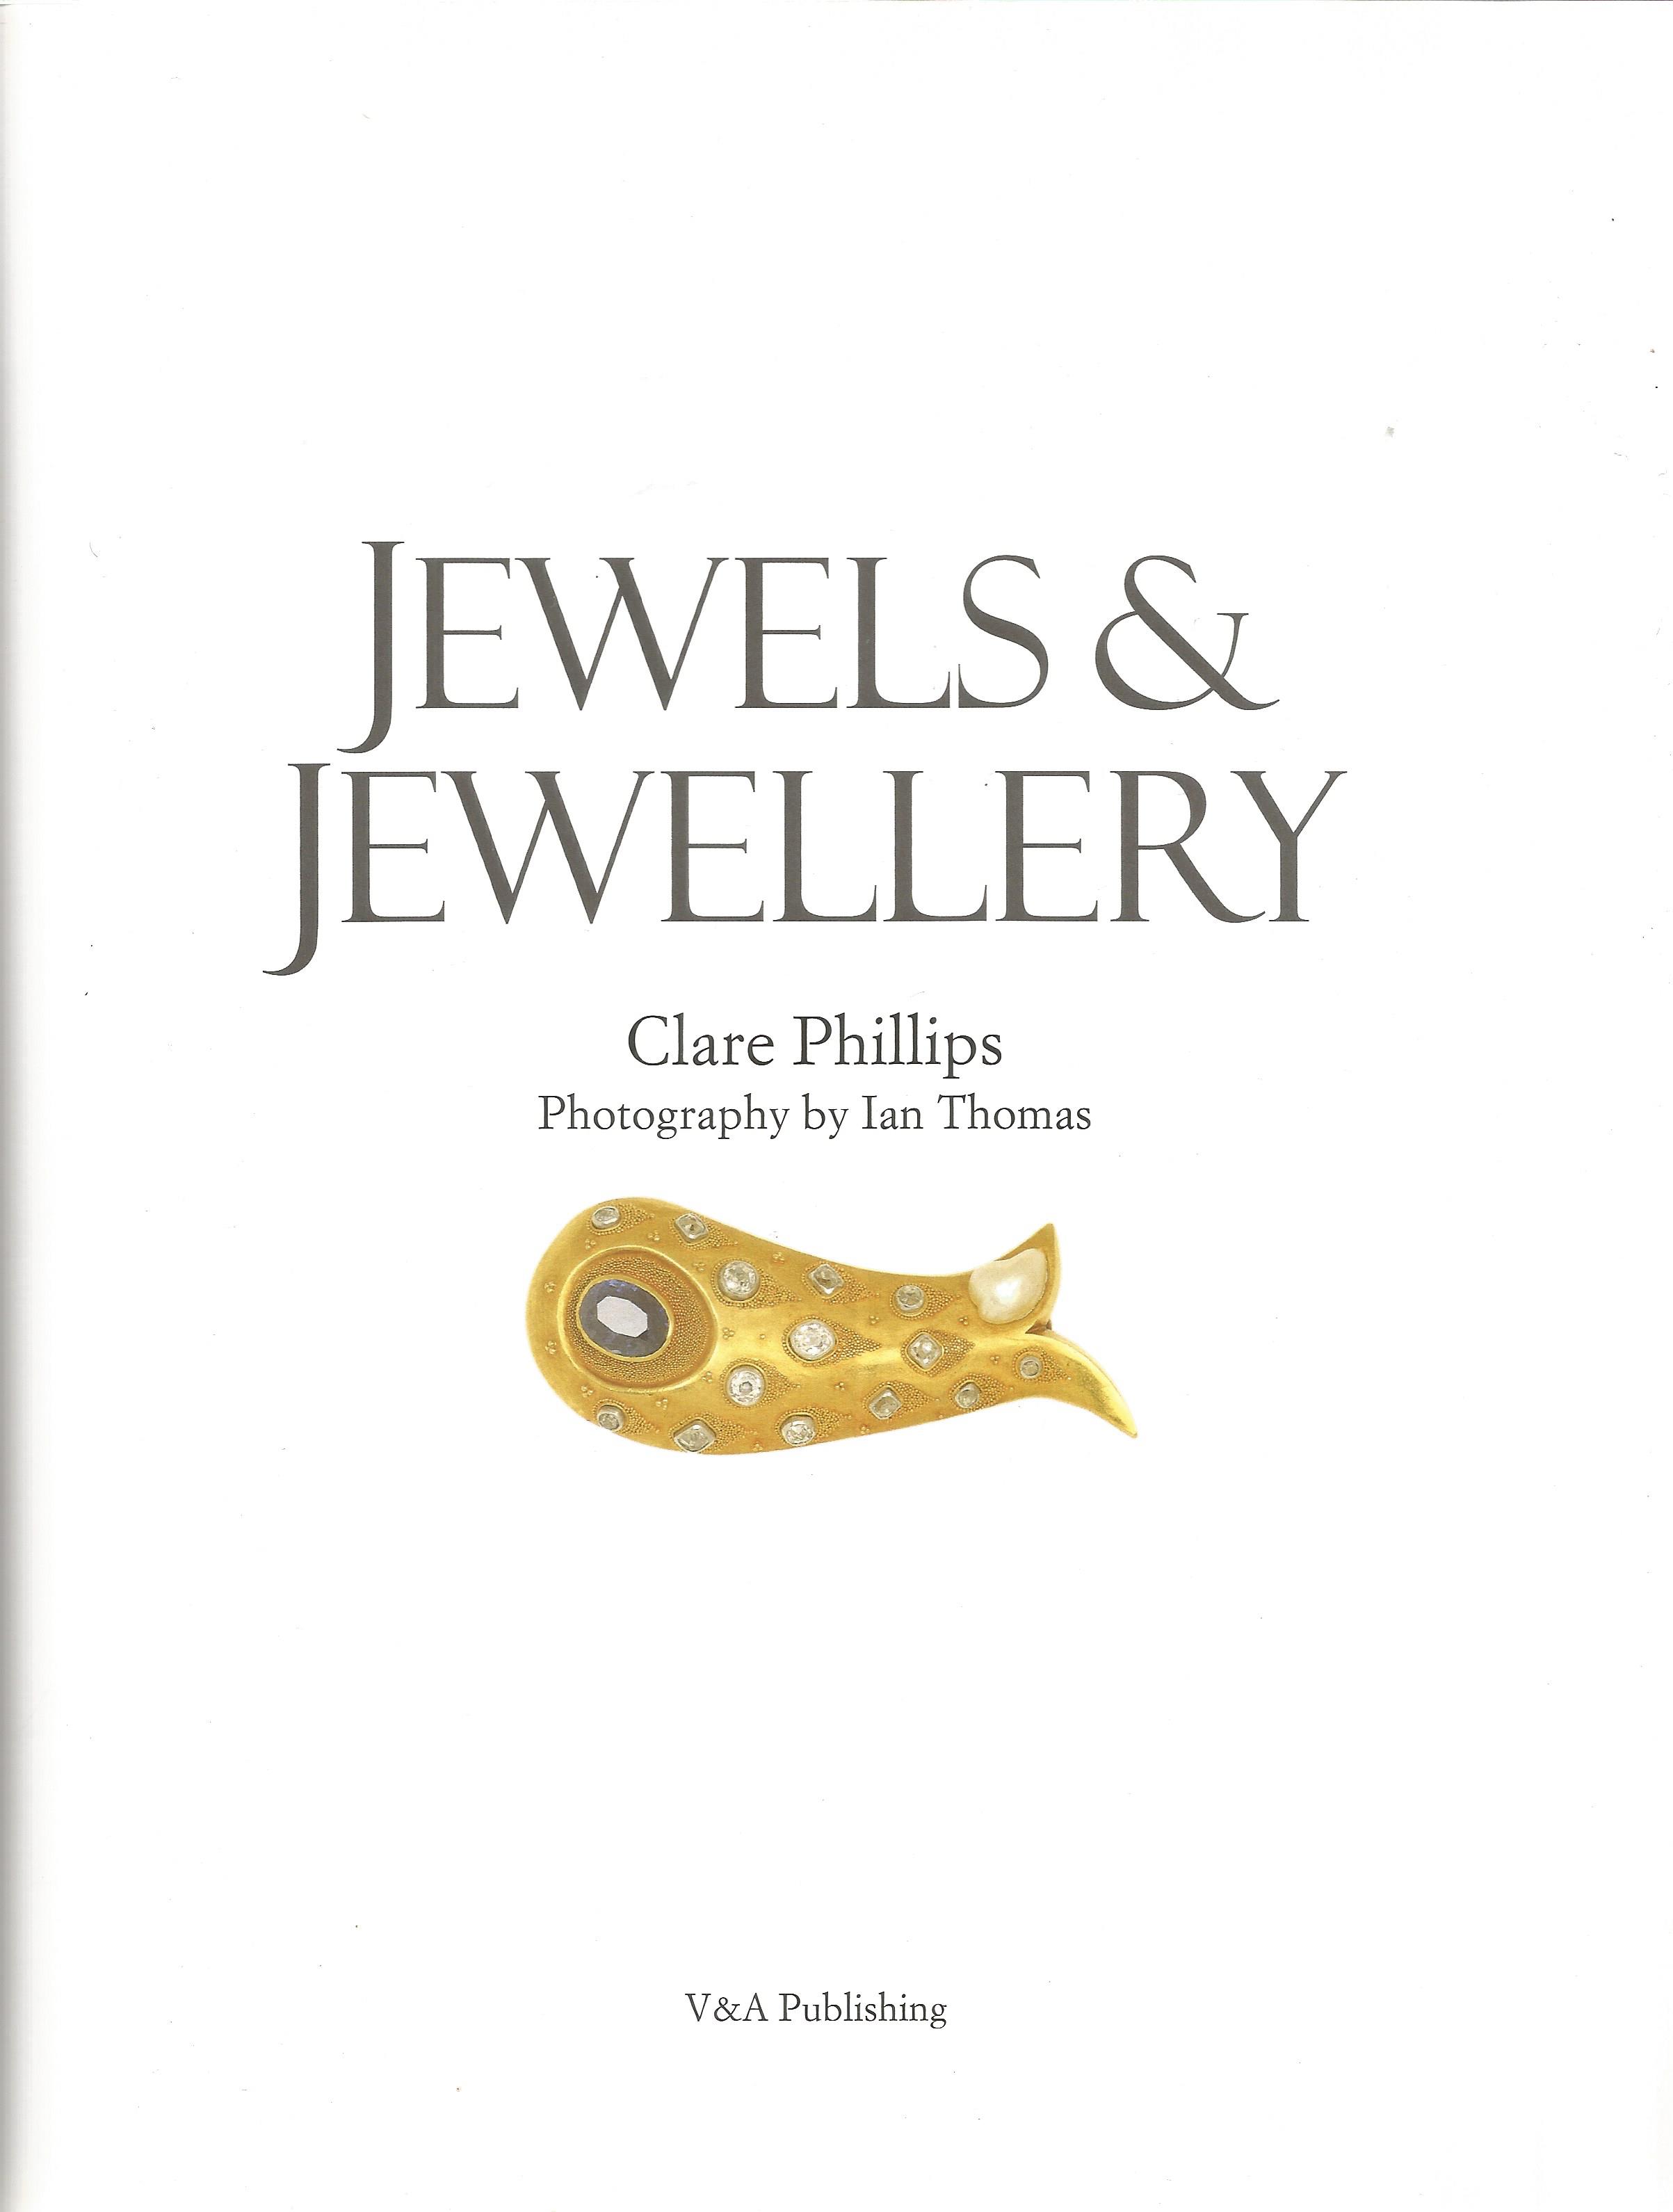 Jewels and Jewellery by Clare Phillips Softback Book 2008 published by V and A Publishing good - Image 2 of 3